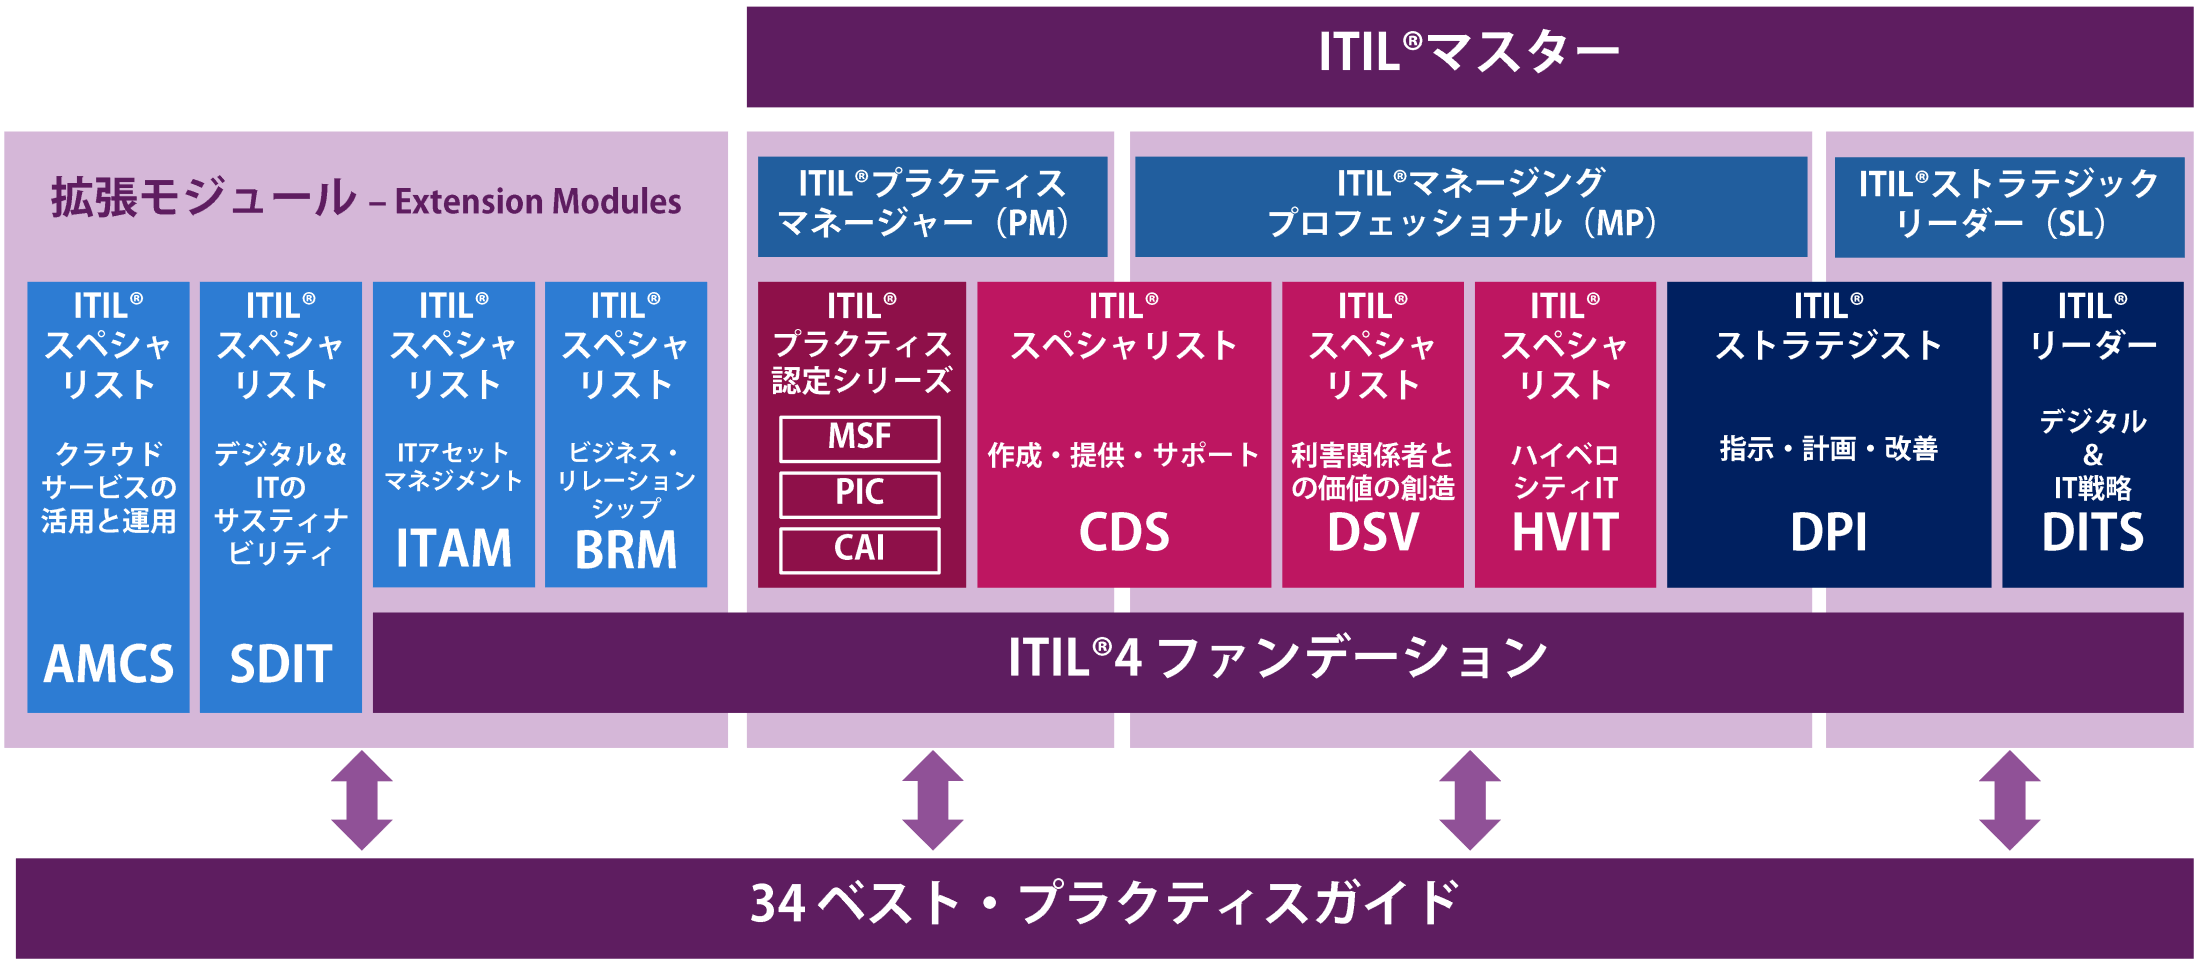 ITIL4_qualification_system_img.png